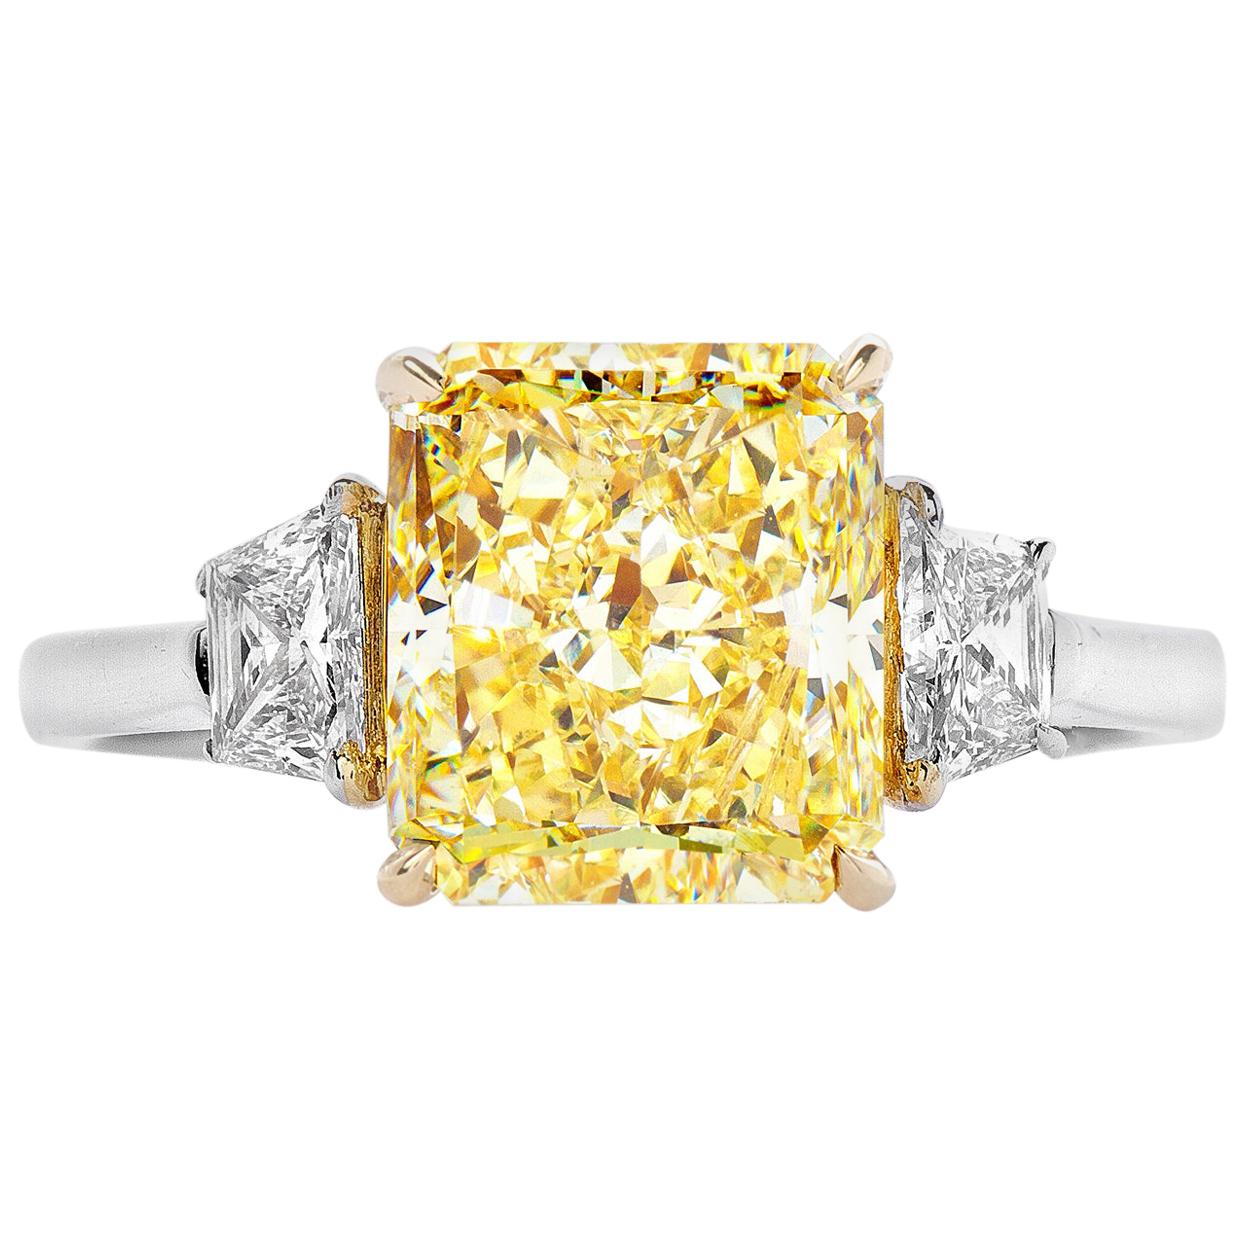 GIA Certified 3.52 Carat Yellow Radiant Cut Diamond For Sale